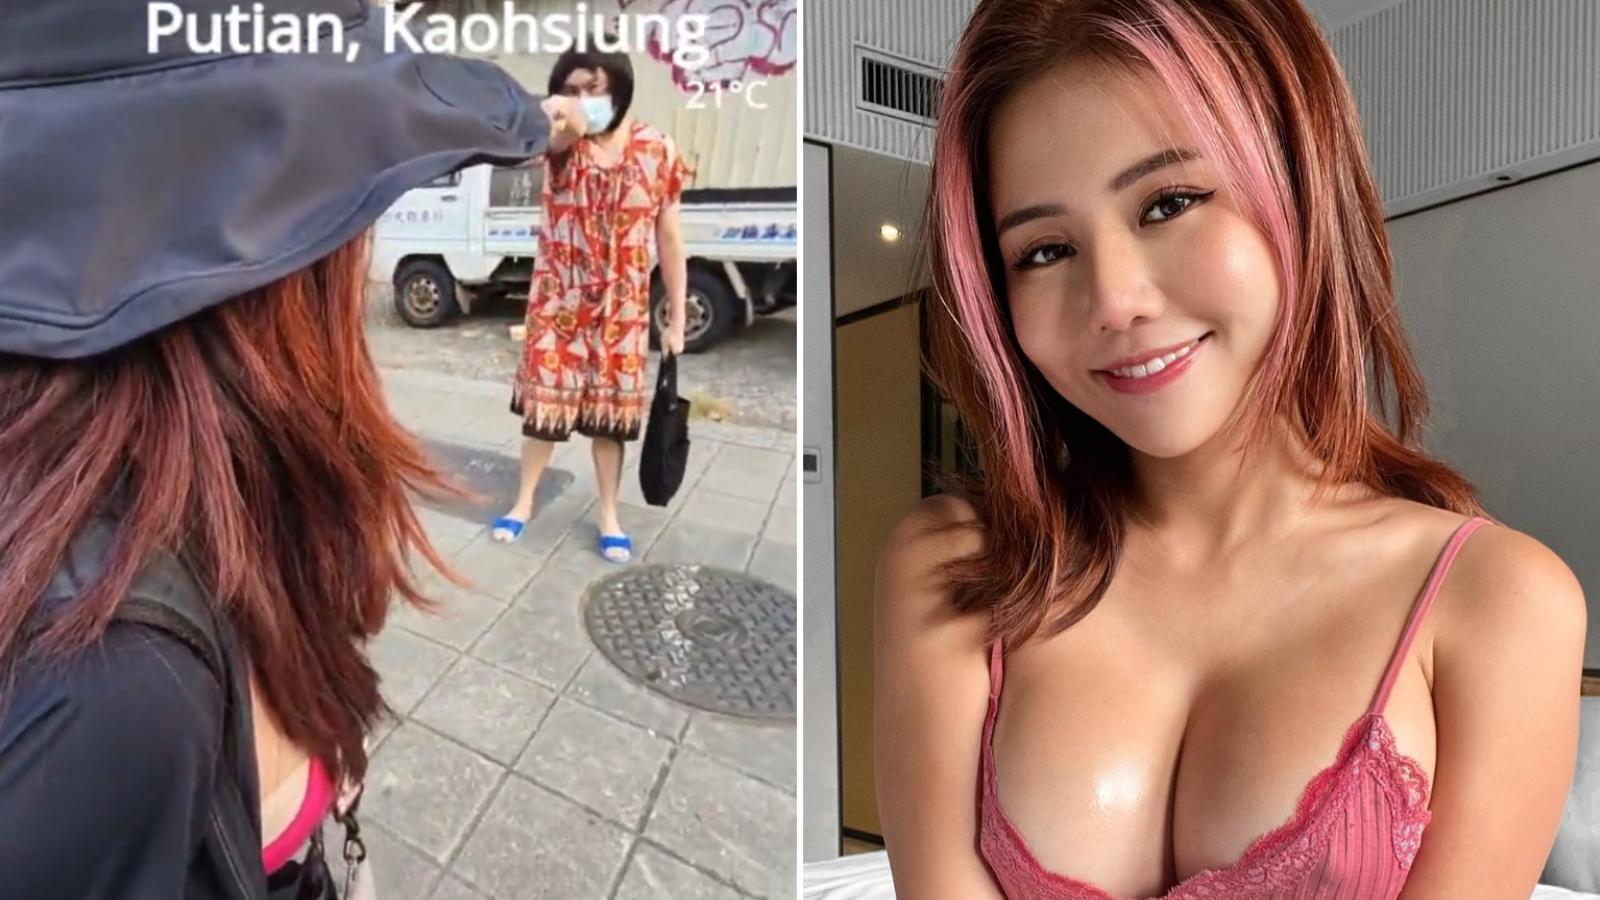 kiaraakitty pelted with eggs by woman for "seducing" her husband